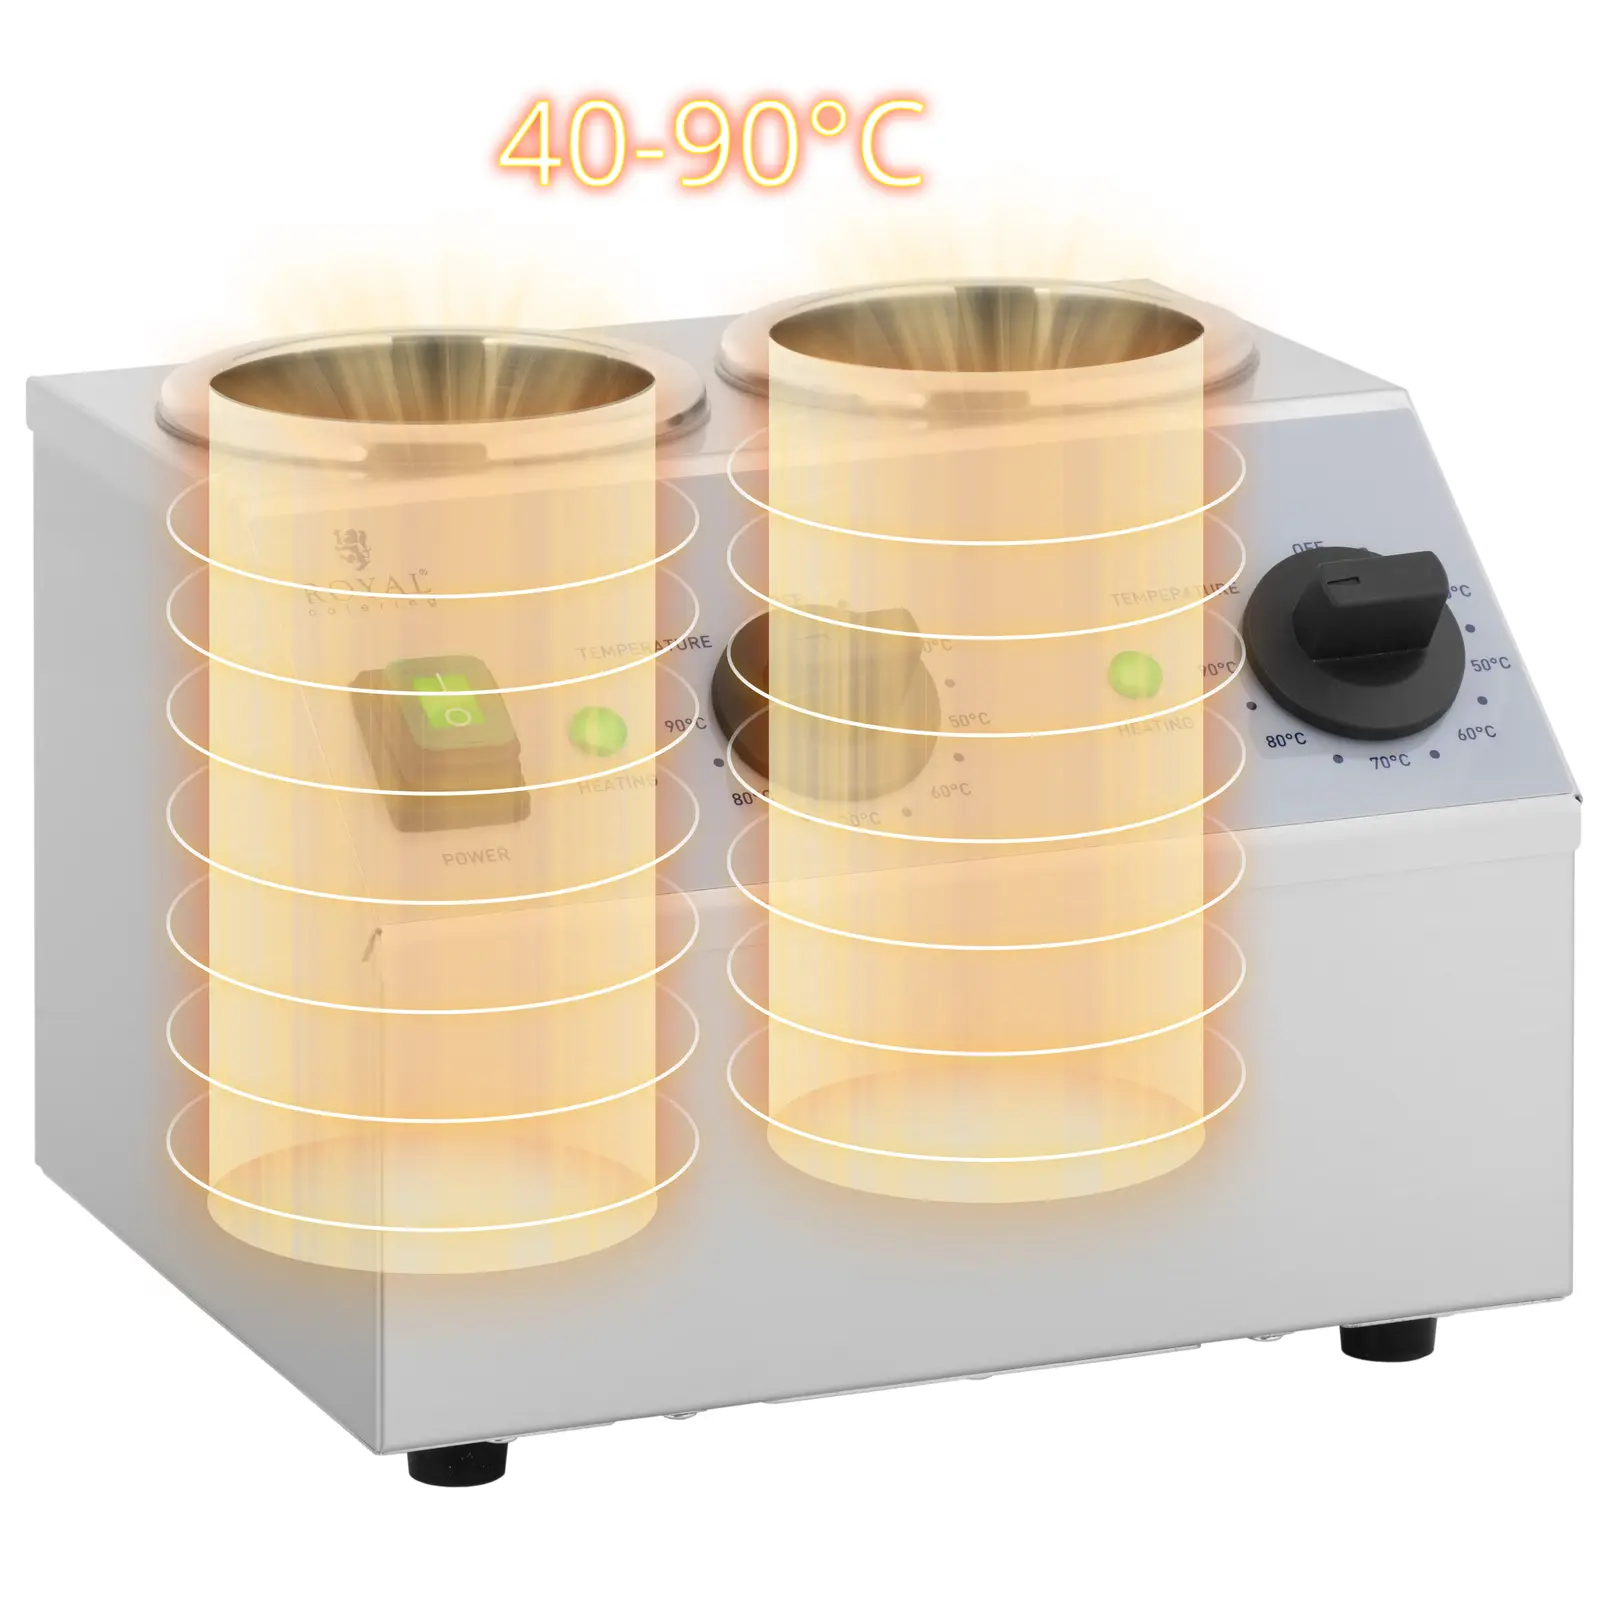 Sauce Warmer - 2 x 1 L - Top Panel - Royal Catering